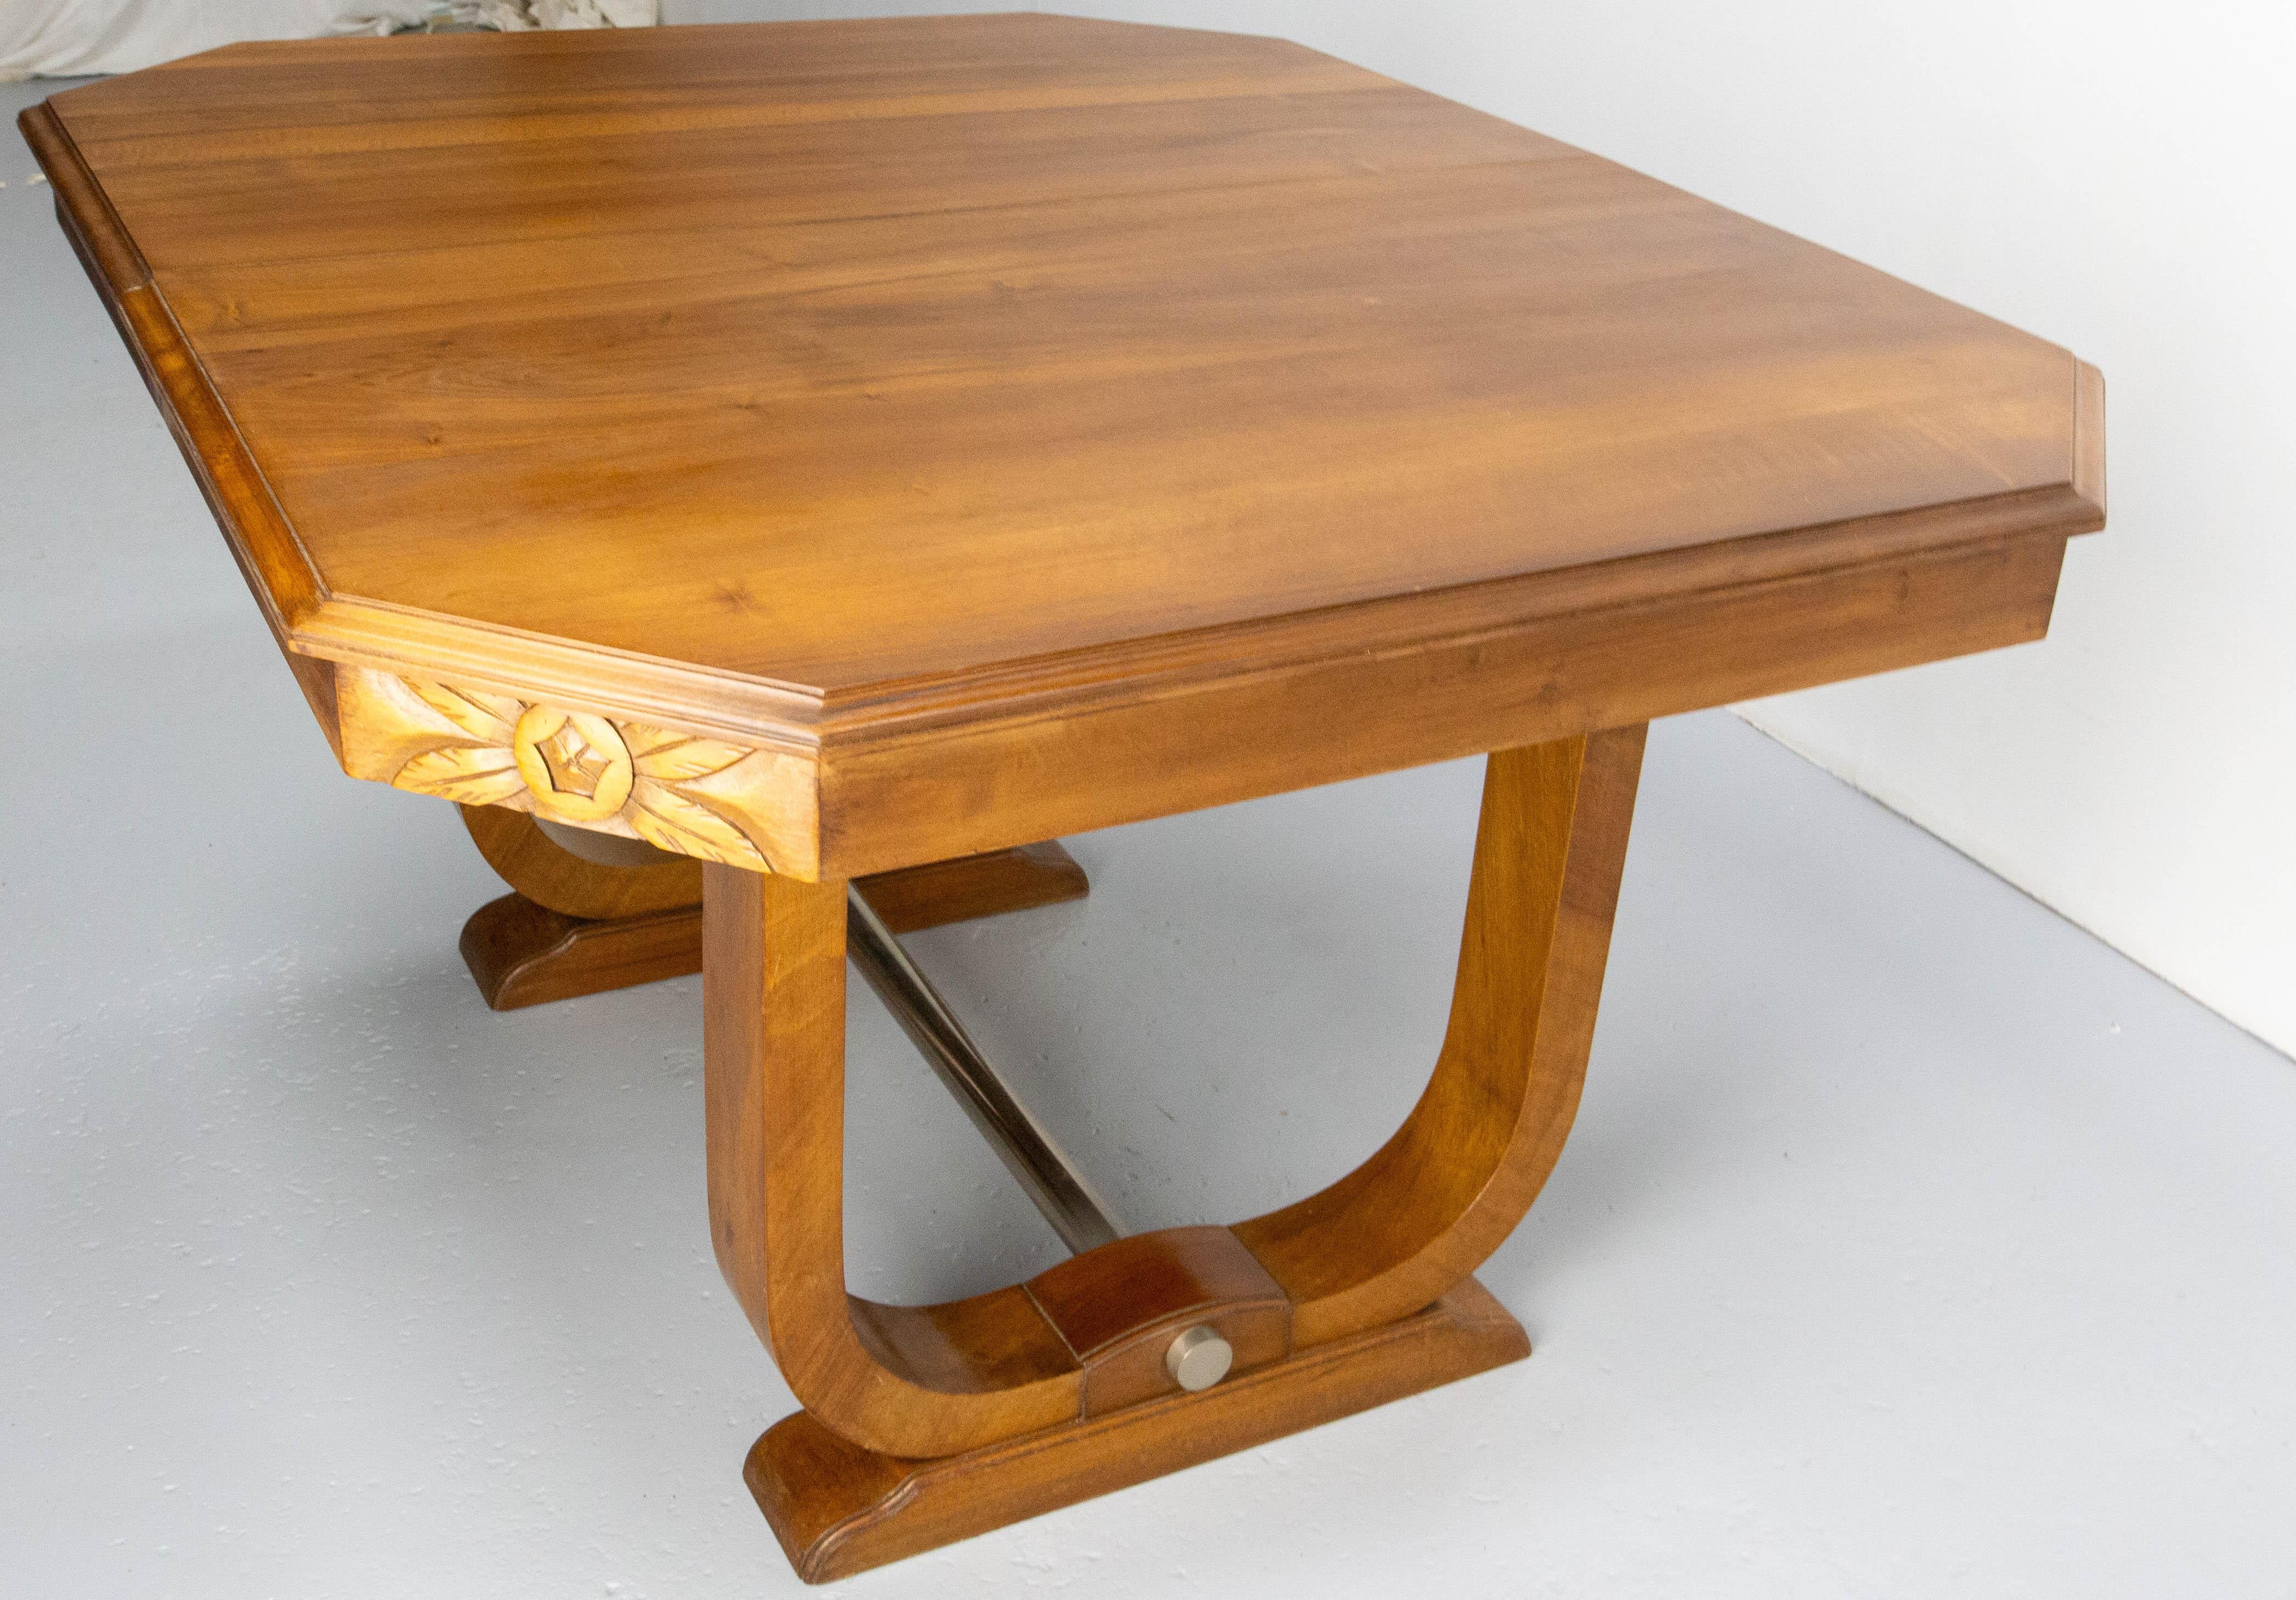 Art Nouveau Dining Walnut Table with Central Extension  Art Déco Period, circa 1930 France For Sale